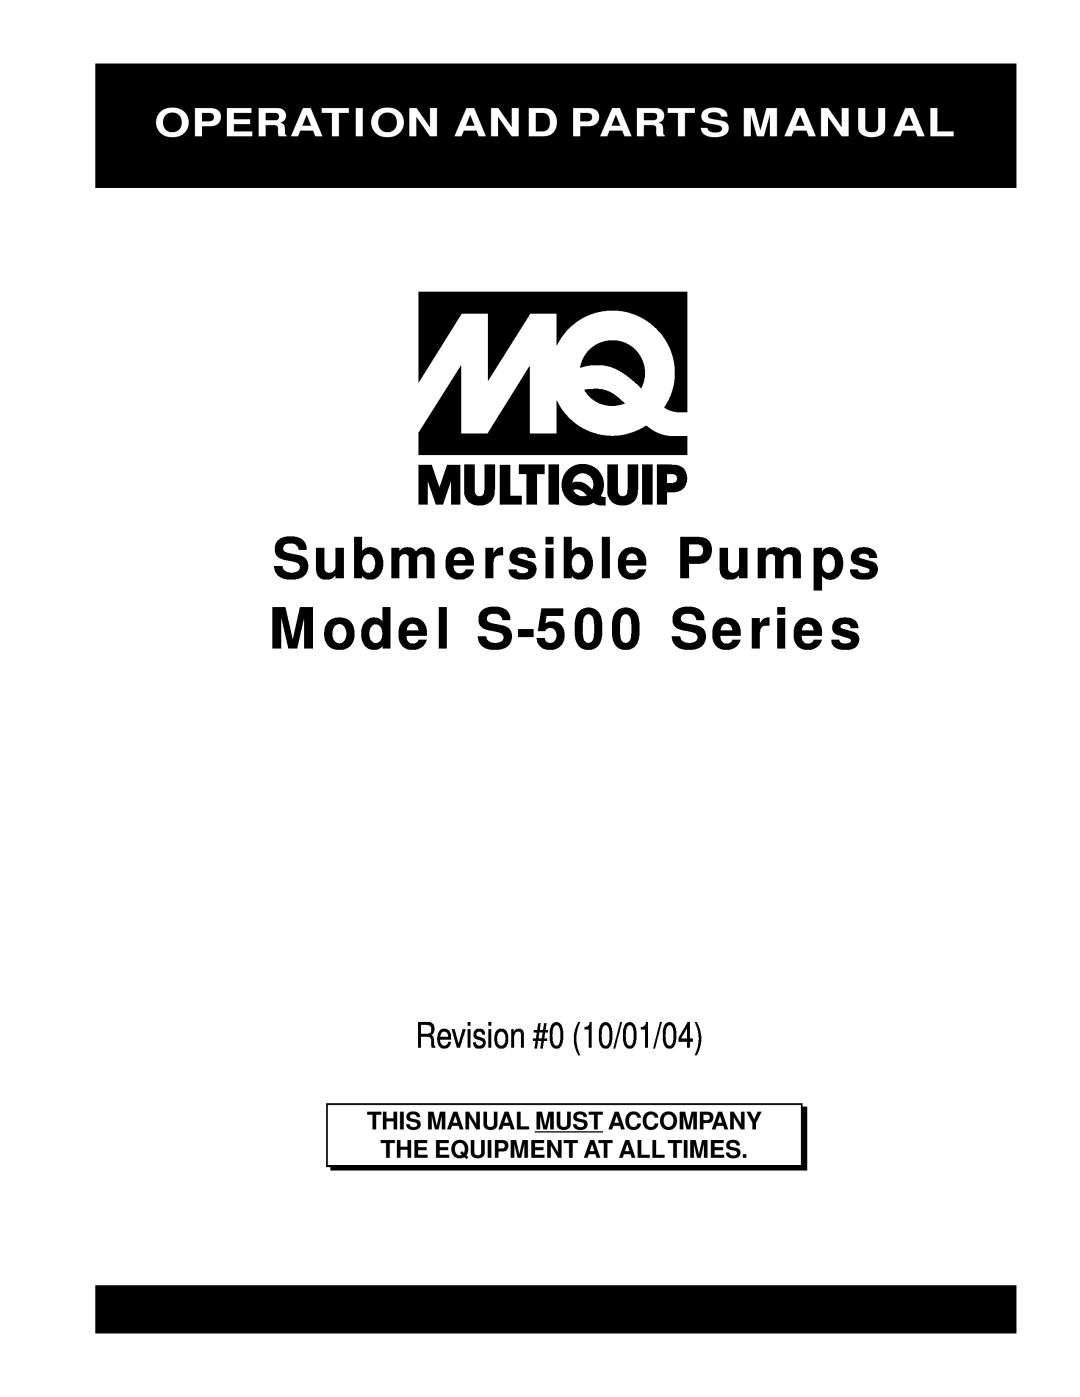 Multiquip manual Operation And Parts Manual, Submersible Pumps Model S-500Series, Revision #0 10/01/04 